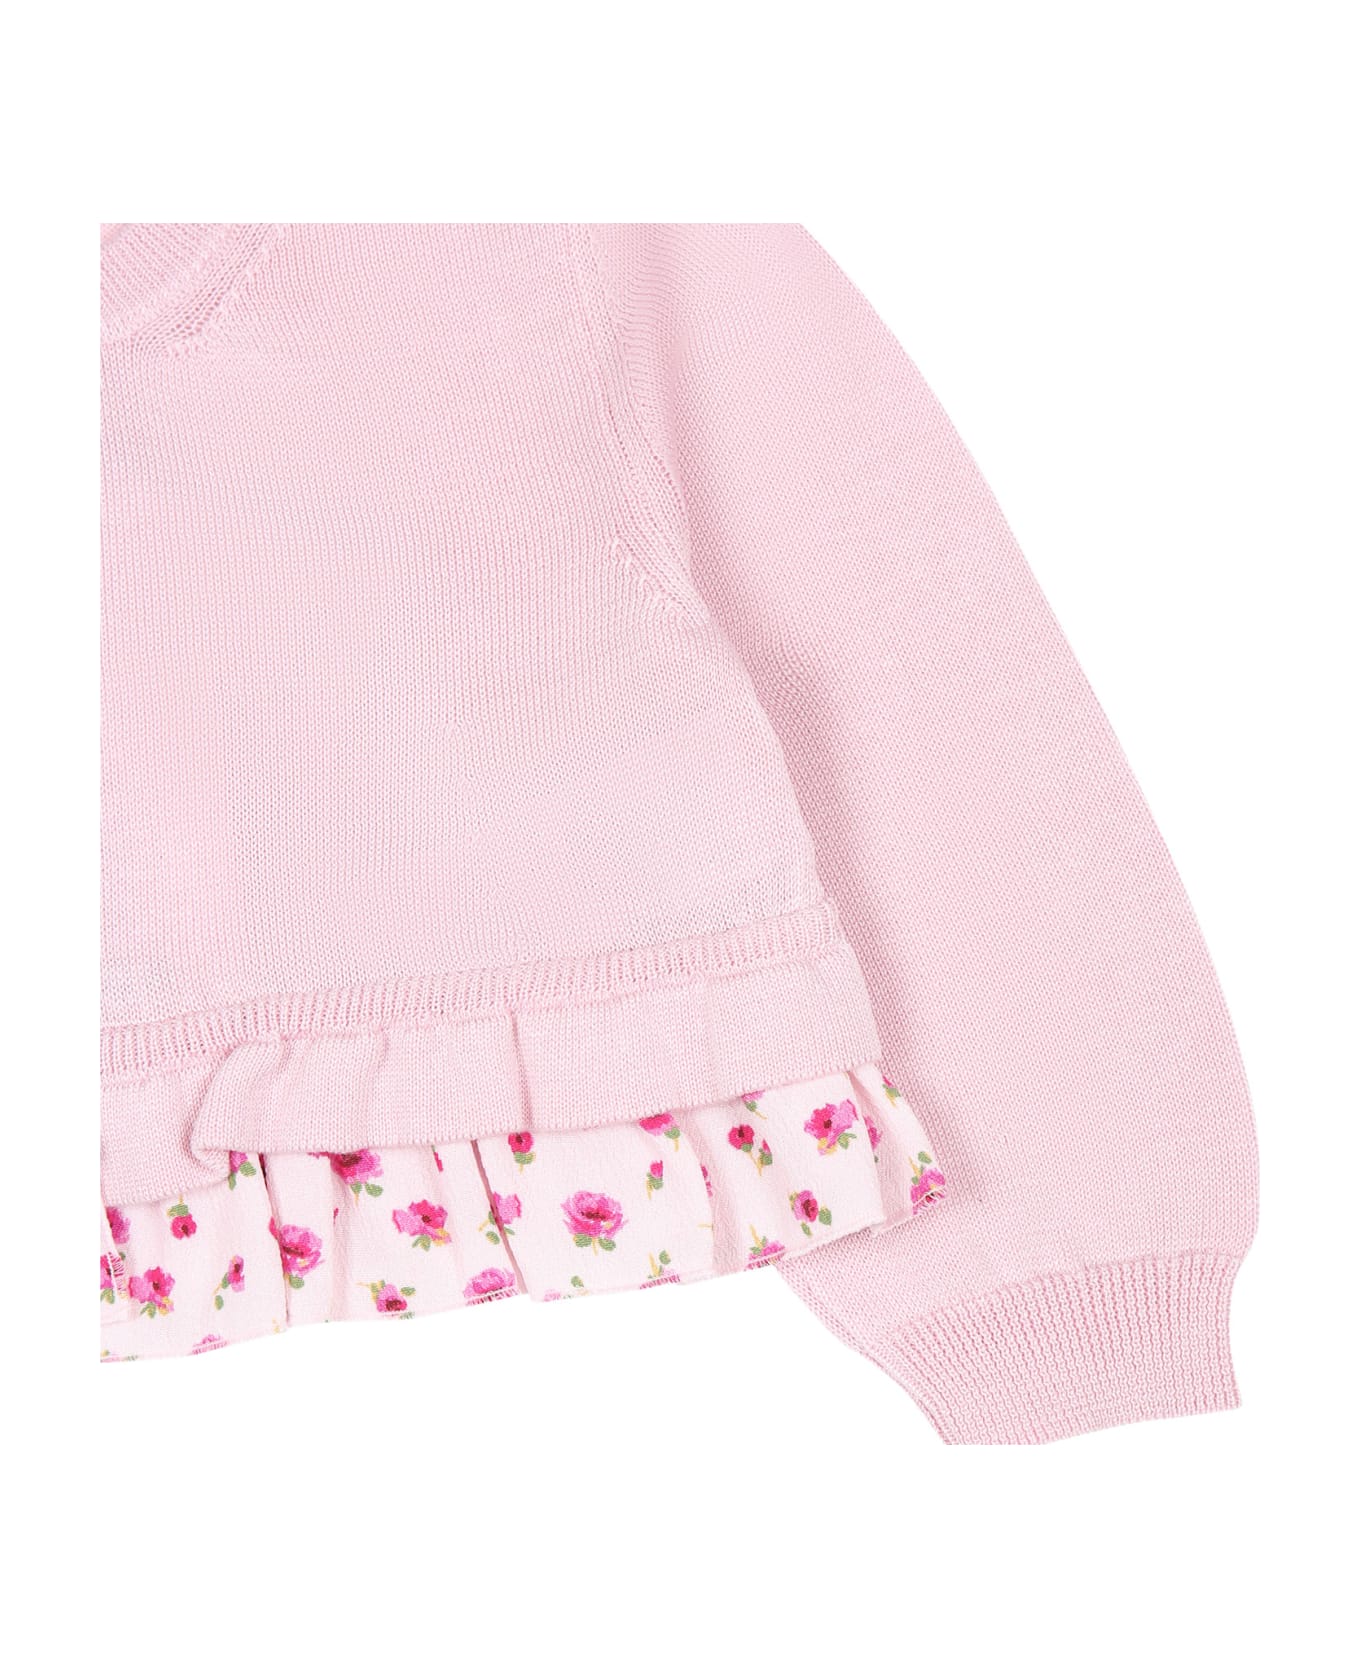 Simonetta Pink Cardigan For Baby Girl With Flowers Print - Pink